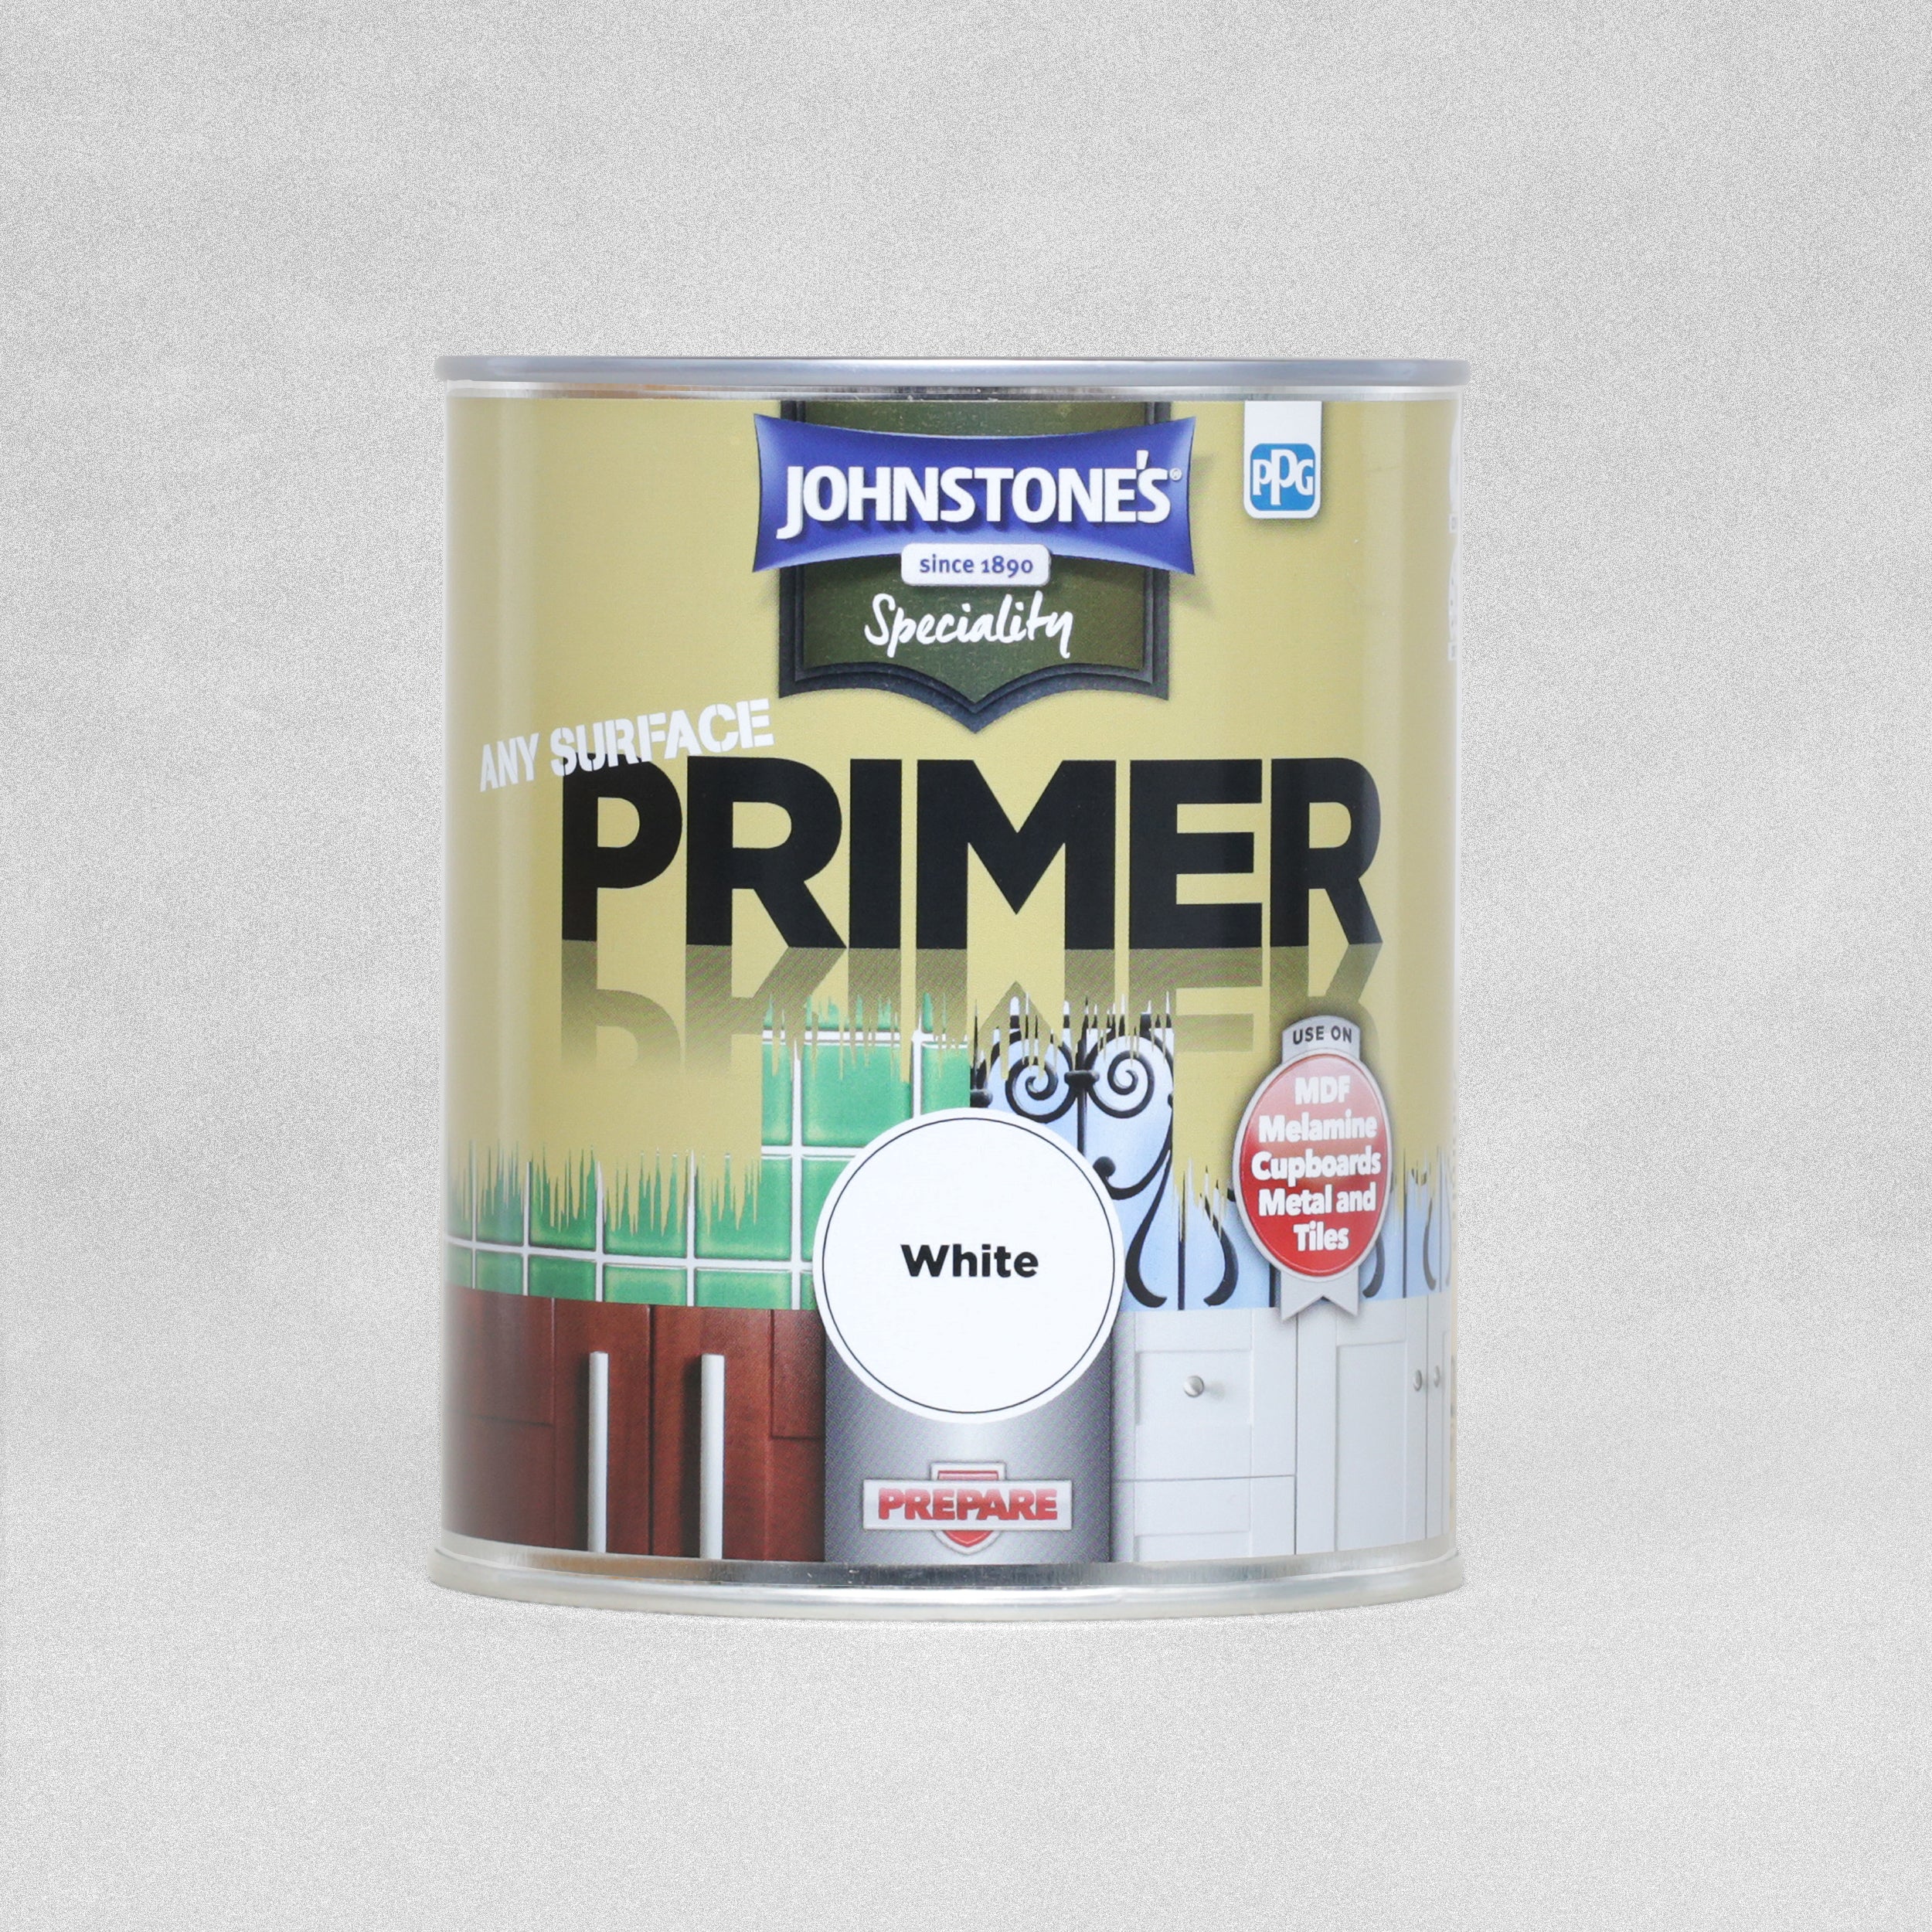 Johnstone's Speciality Any Surface Primer White - 750ml